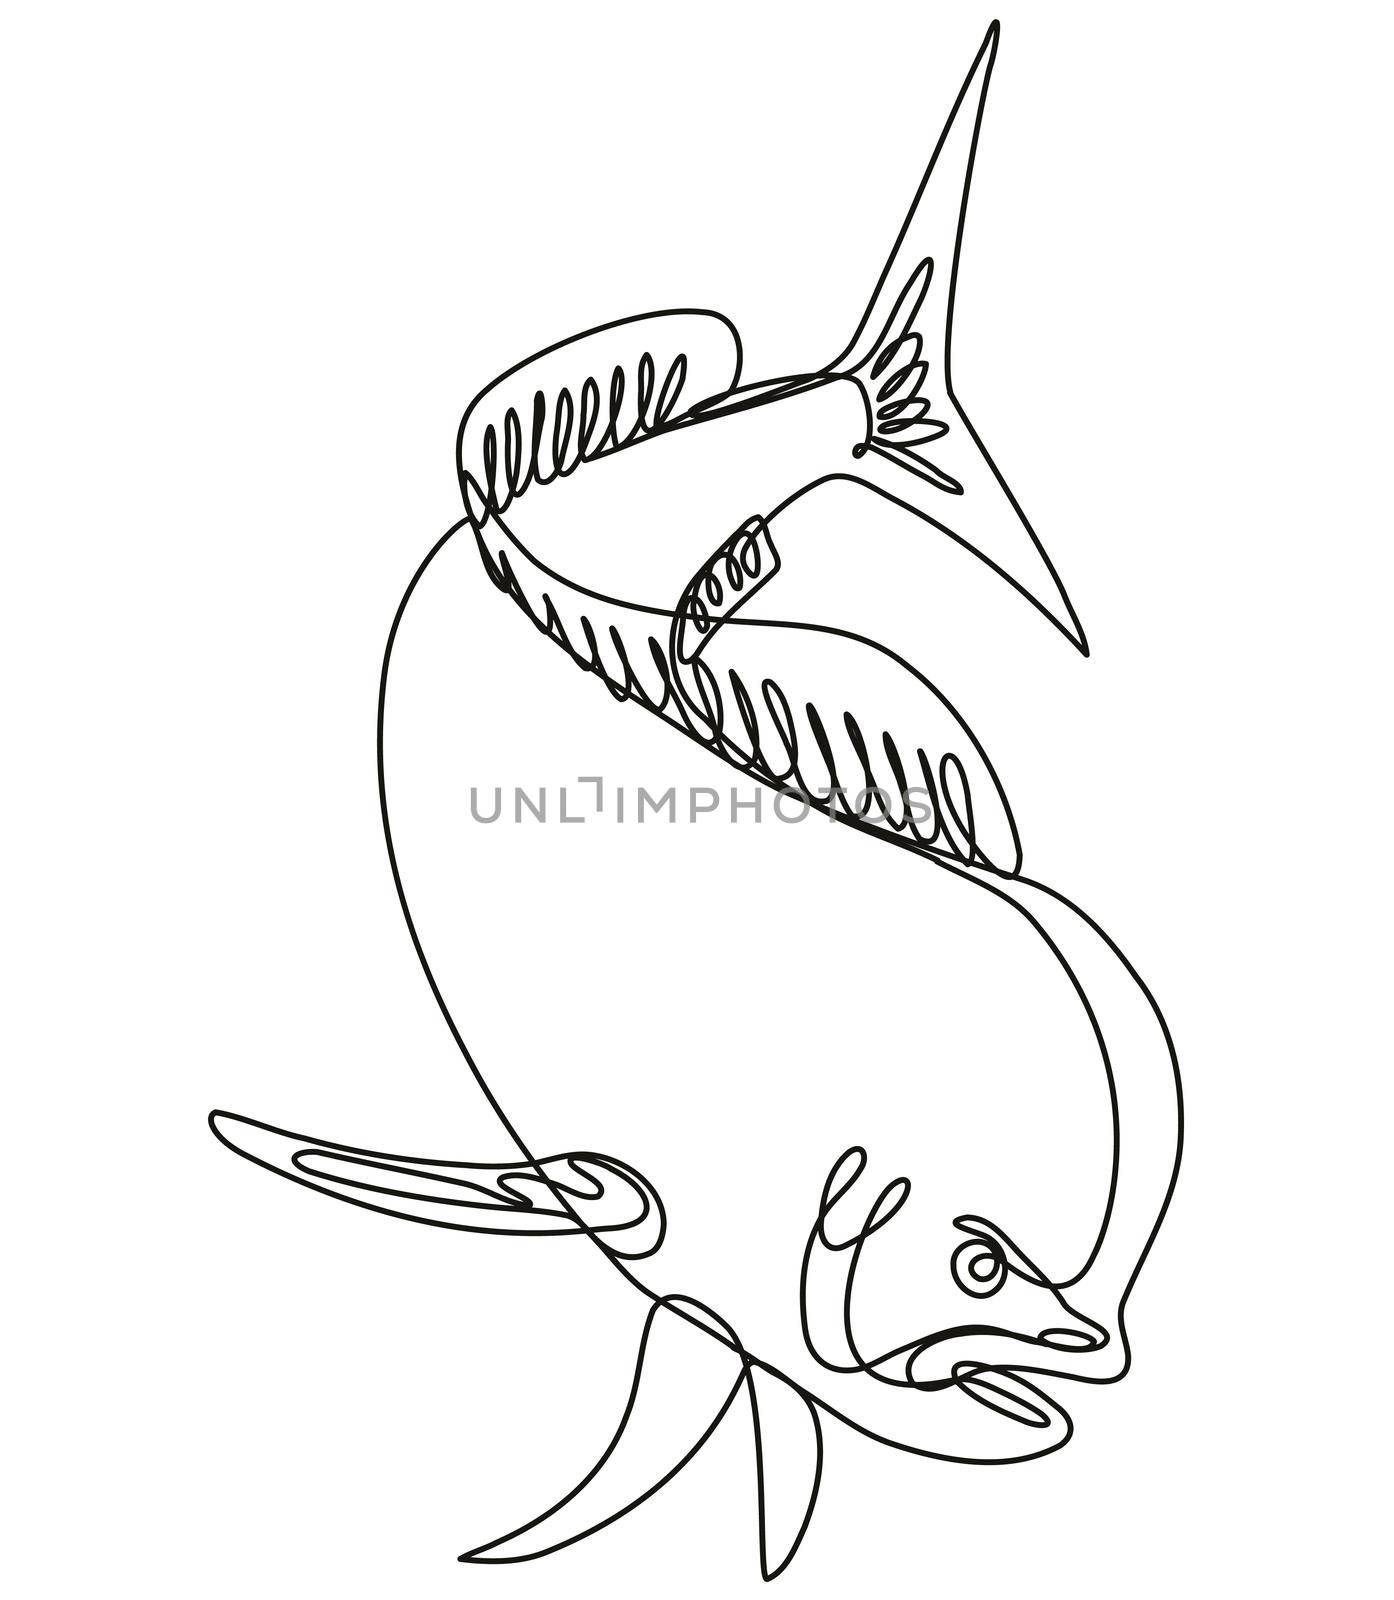 Continuous line drawing illustration of a dorado dolphin fish or mahi mahi diving down done in mono line or doodle style in black and white on isolated background. 